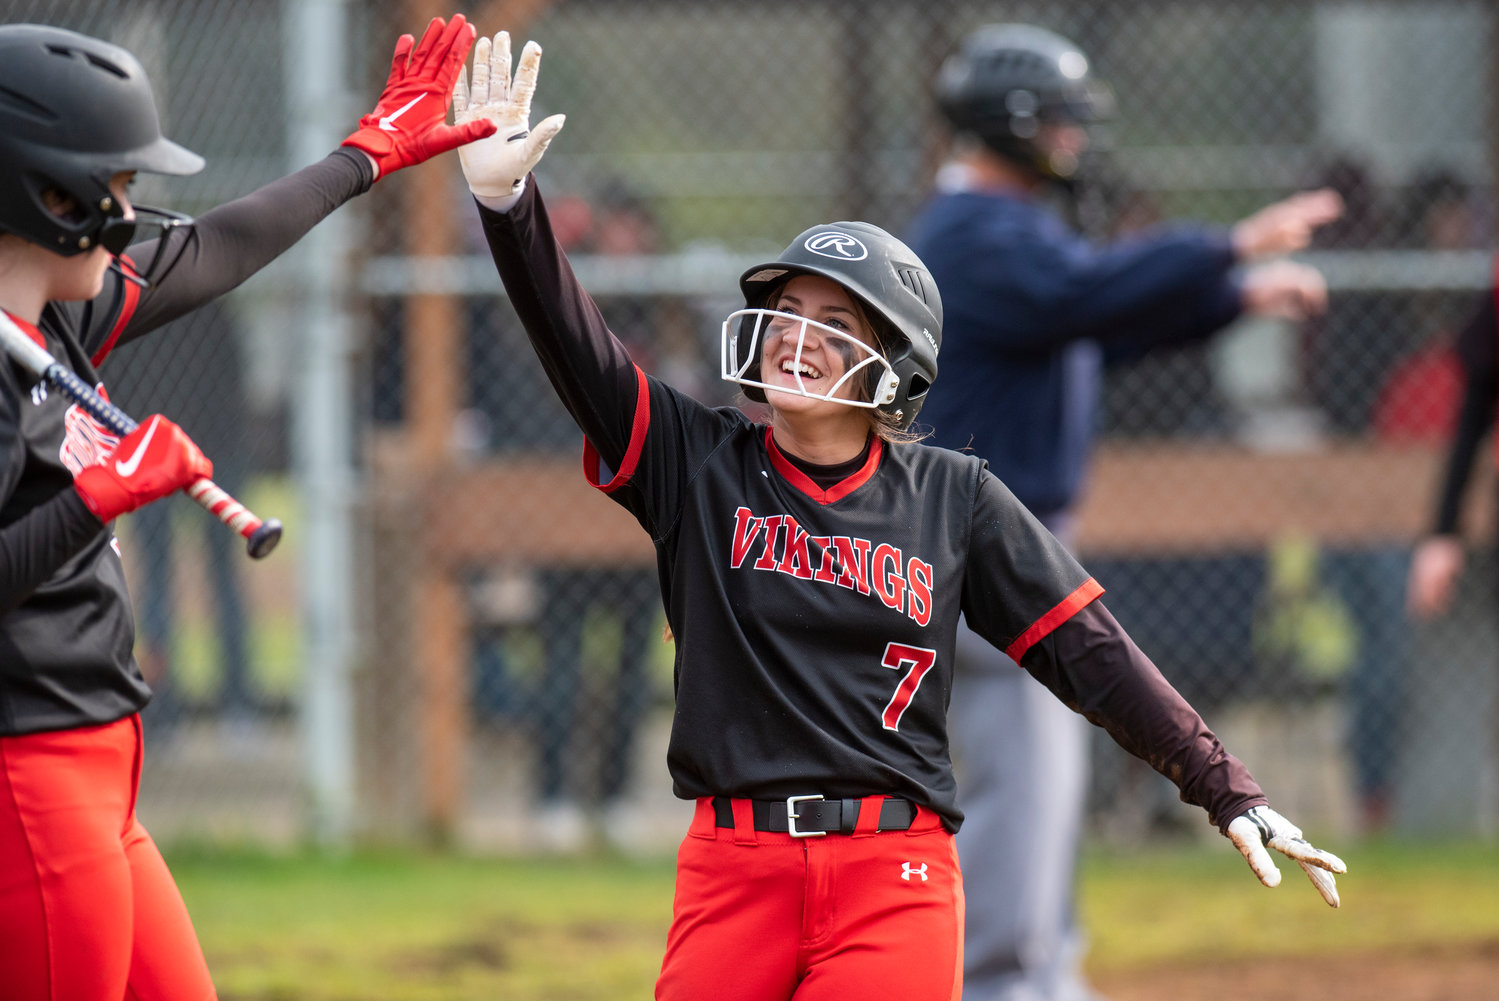 Mossyrock's Lois Stone (7) high-fives a teammate after scoring a run against Oakville during a game at Legends Field Complex in Chehalis Village on April 28.